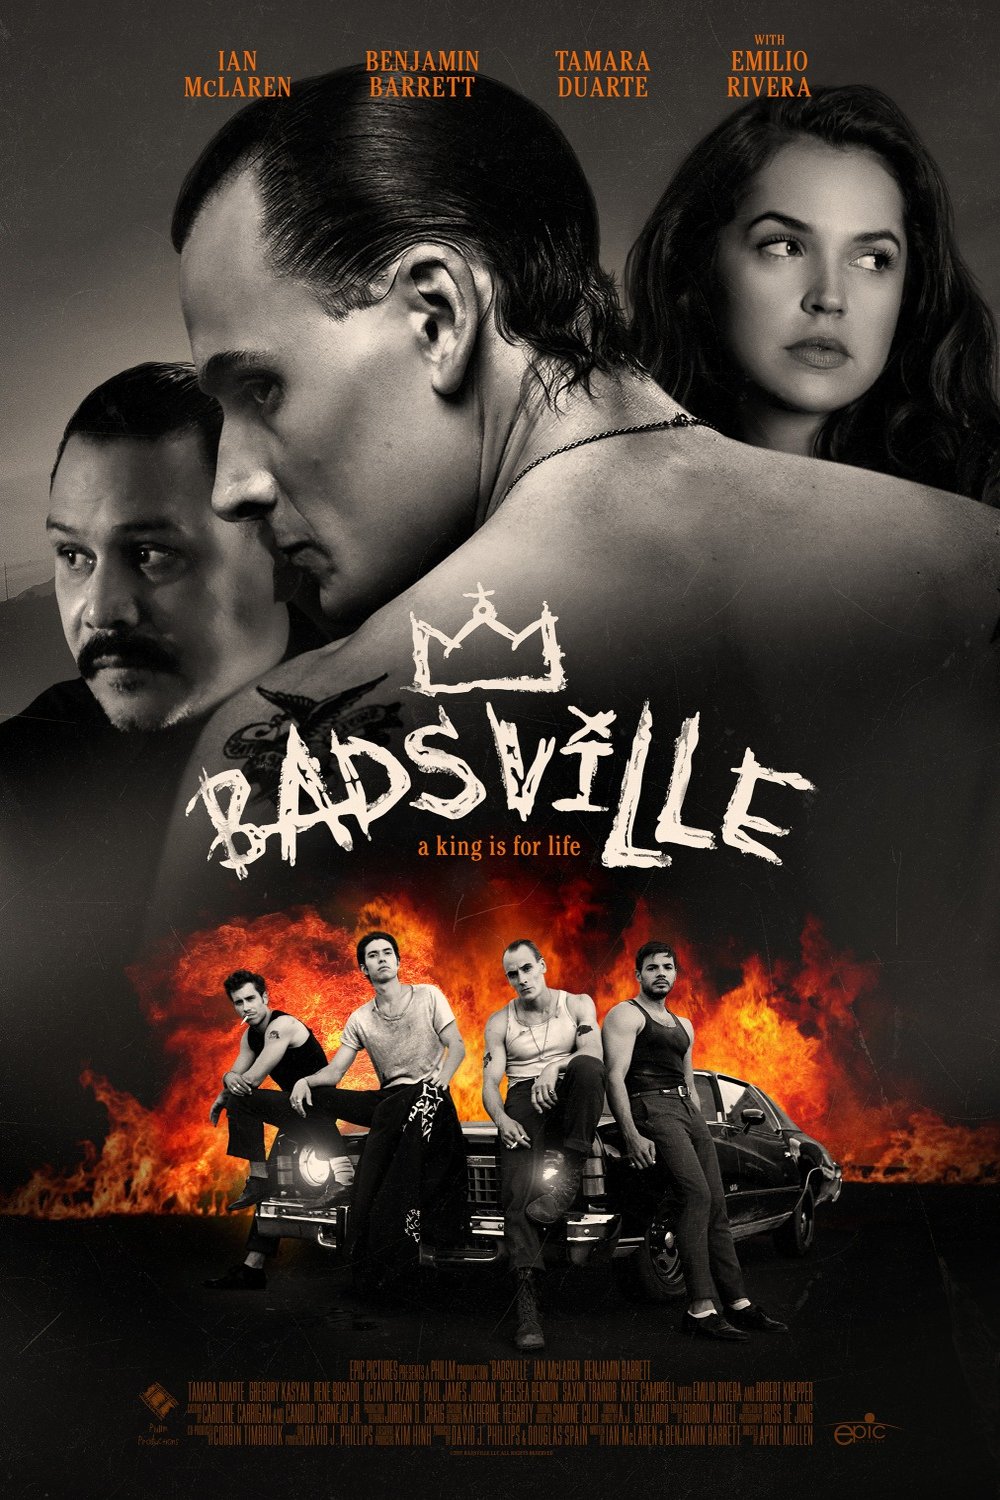 Poster of the movie Badsville